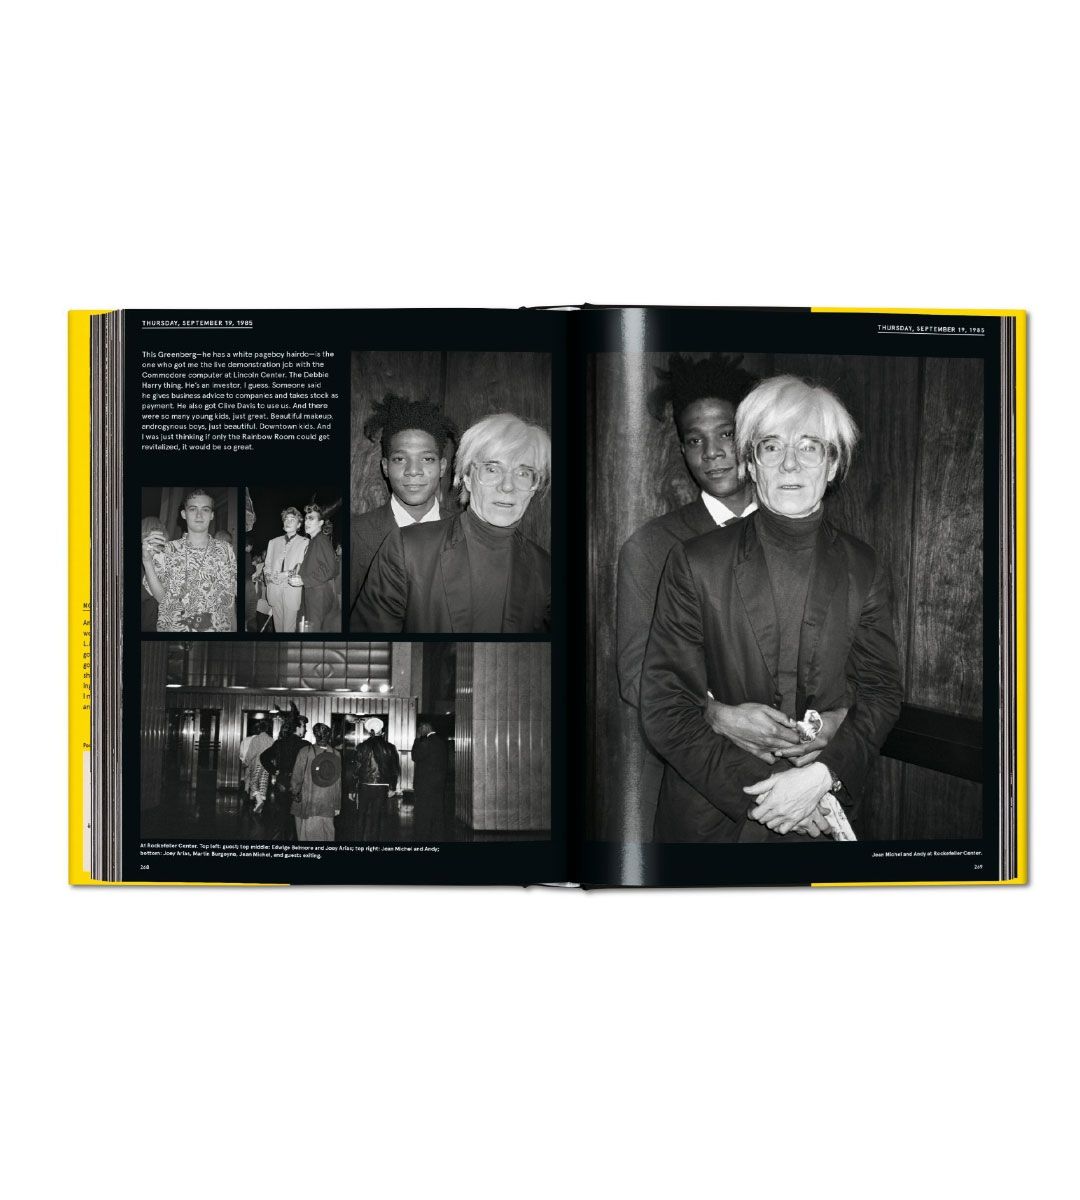 Warhol on Basquiat. The Iconic Relationship Told in Andy Warhol’s Words and Pictures